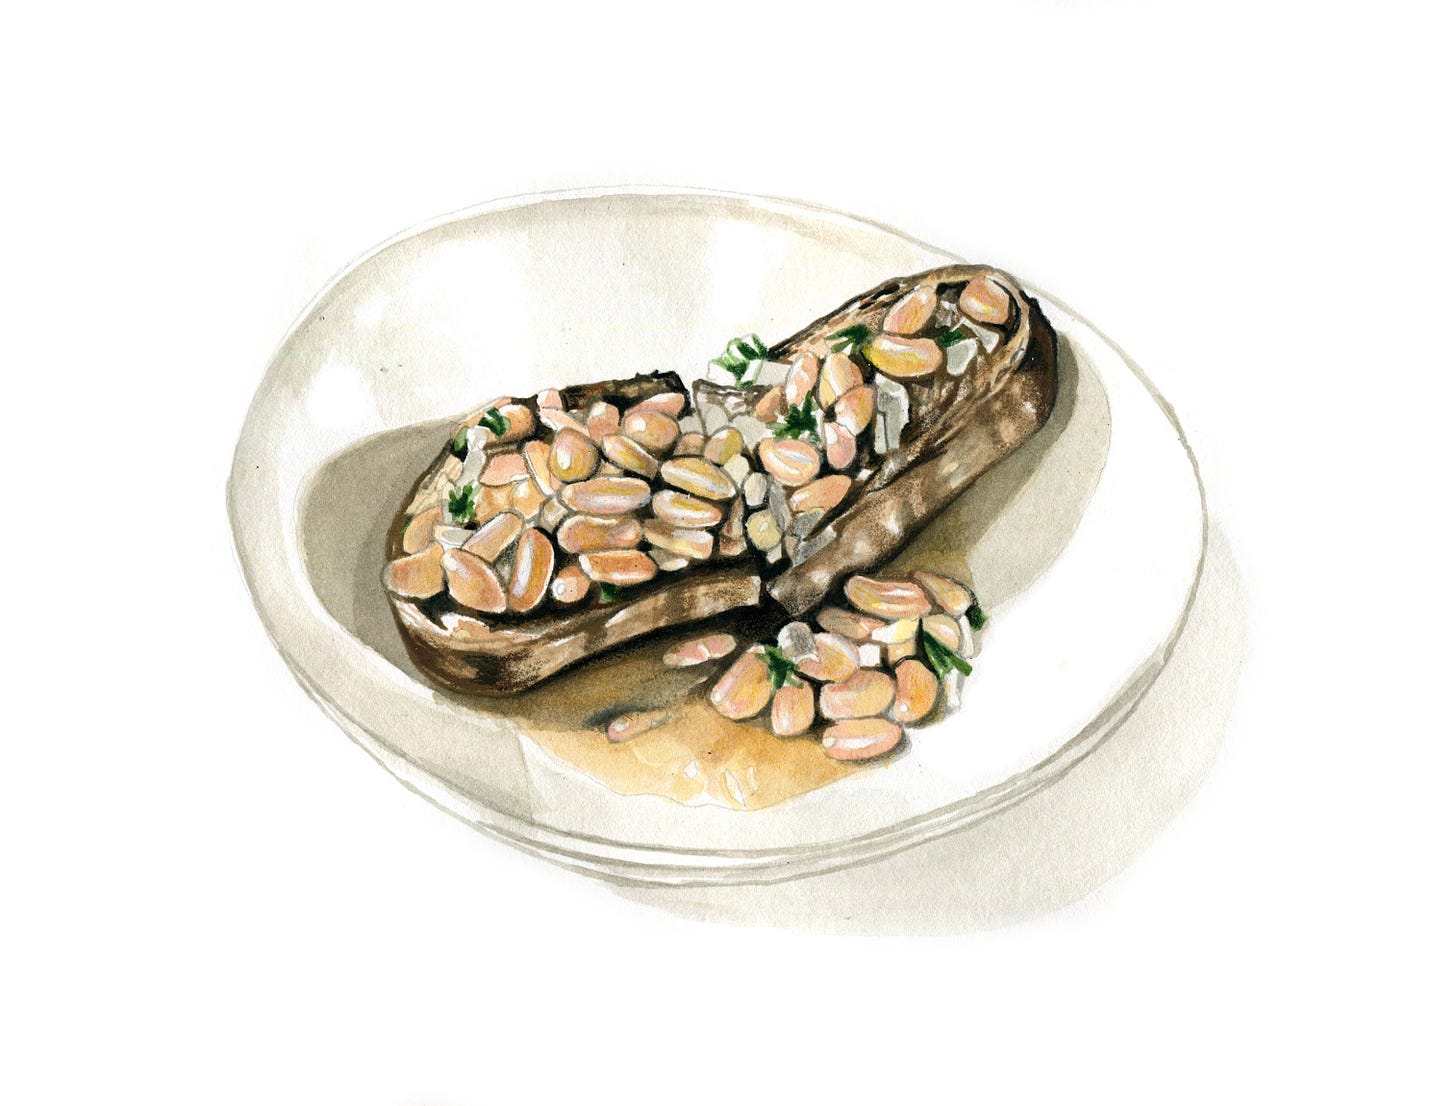 Beans on toast, painted in watercolor